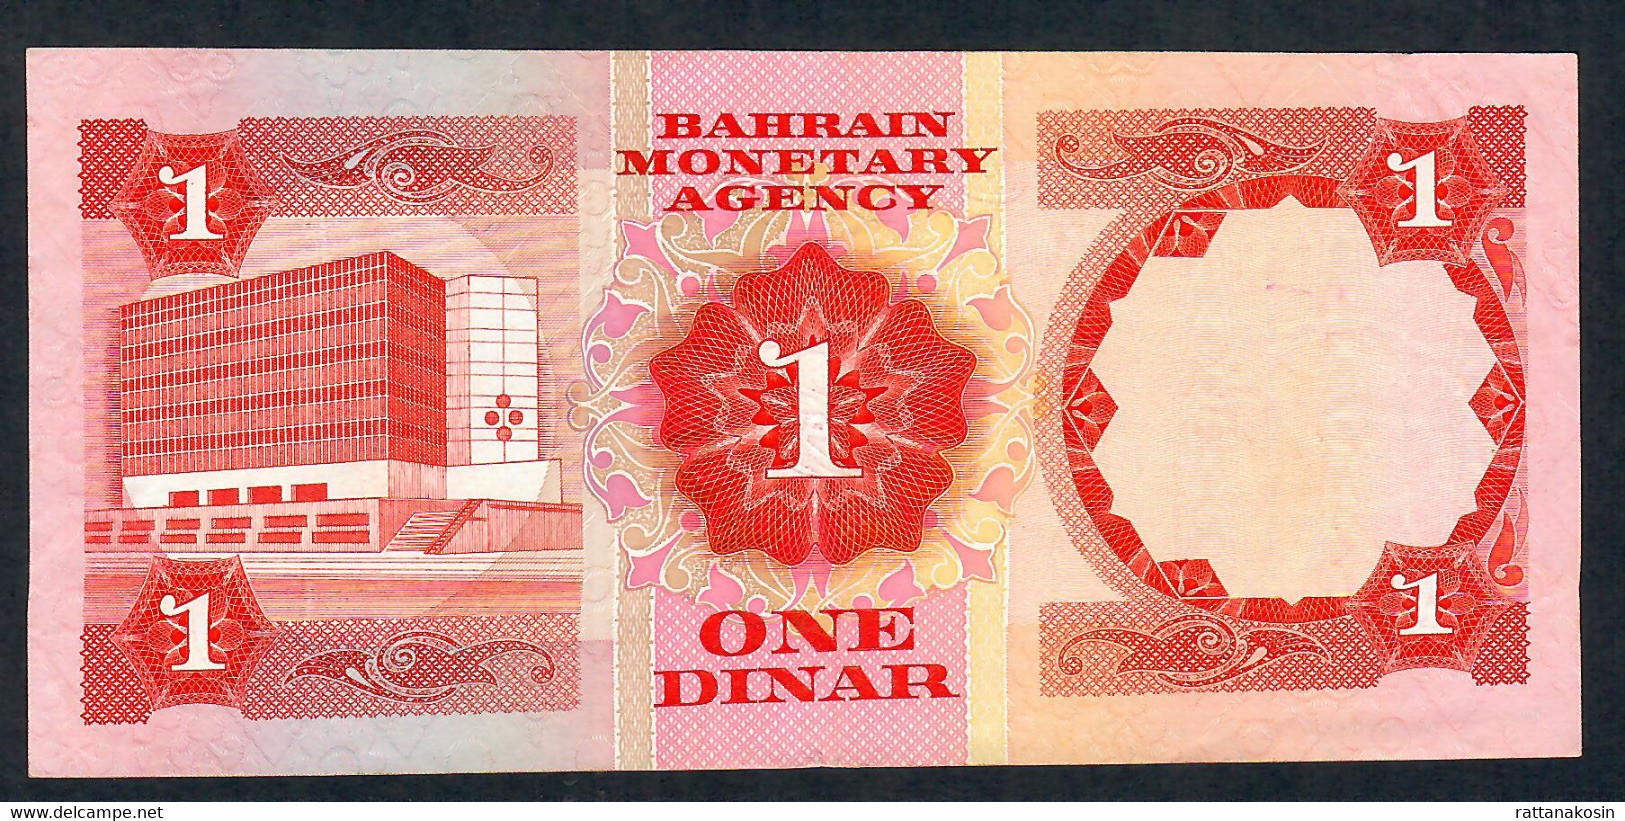 BAHRAIN P8 1 DINAR DATED 1973 ISSUED IN 1979   XF - Bahrain